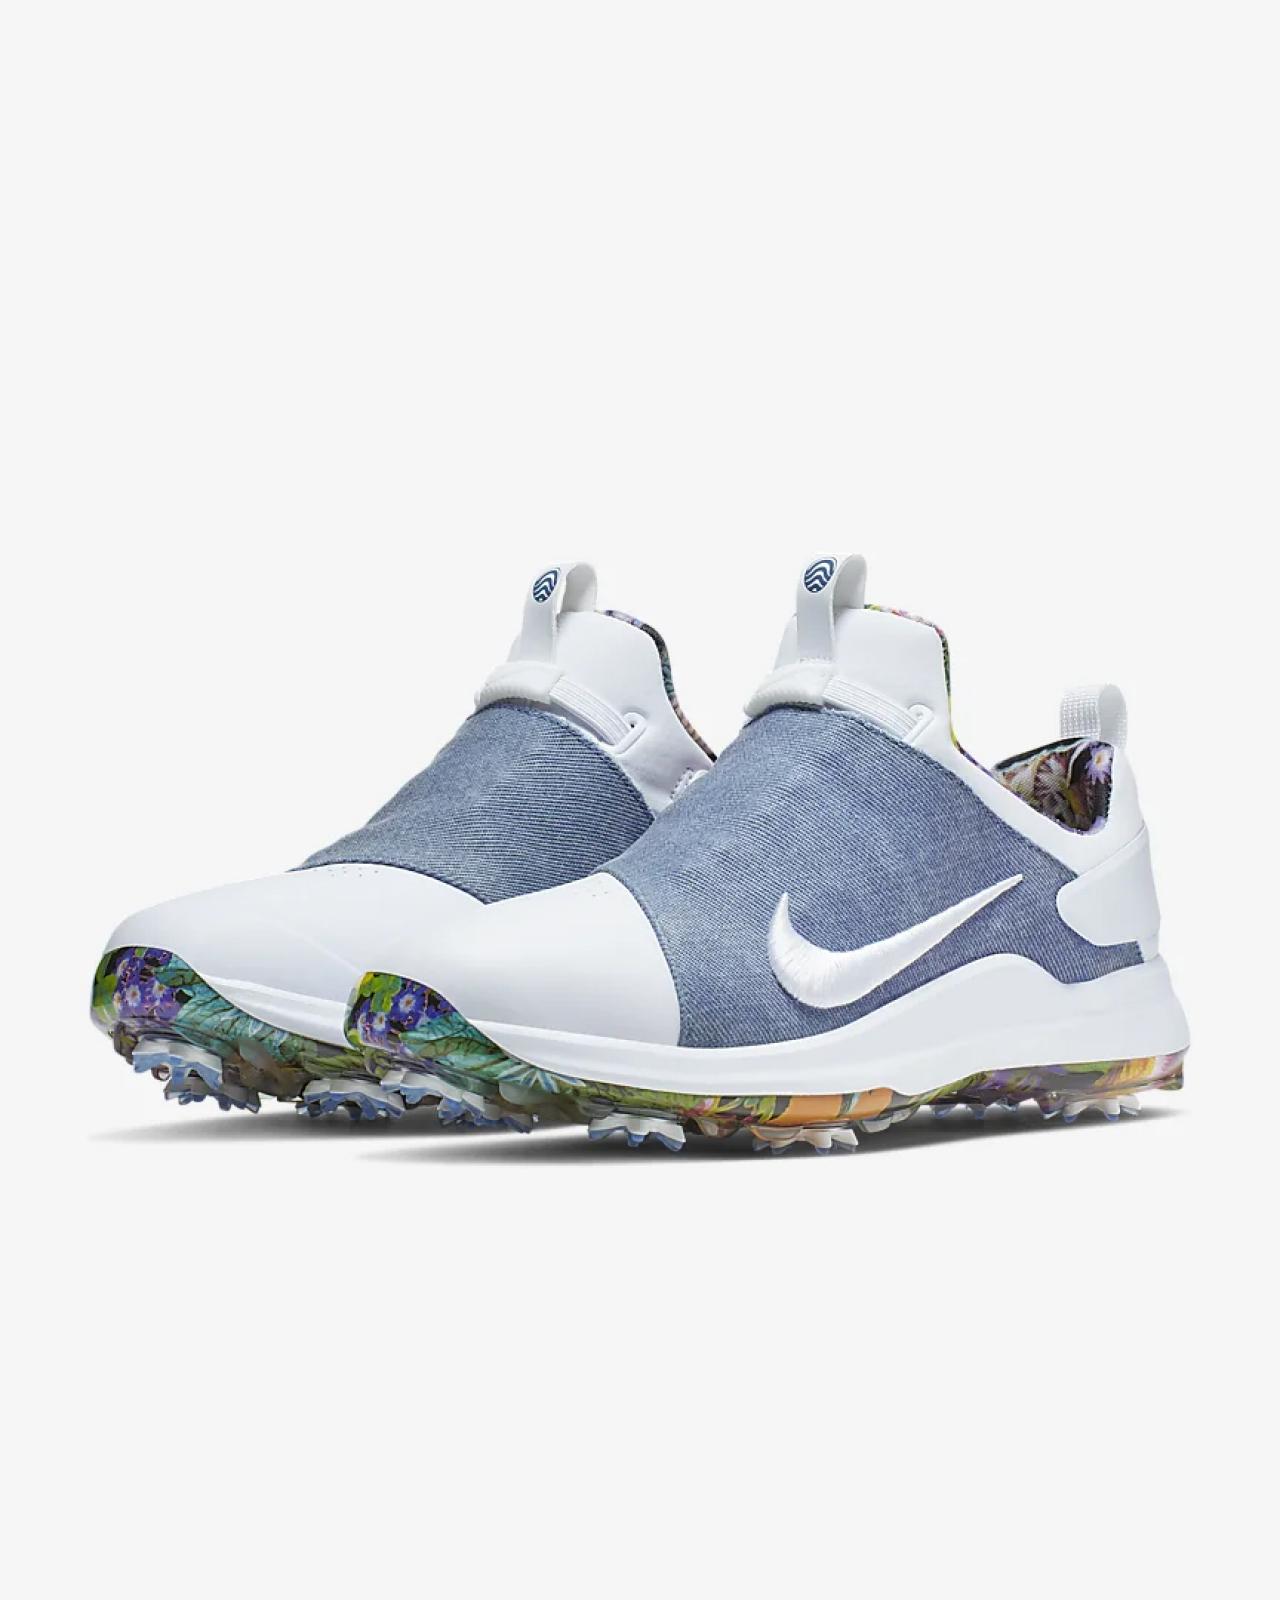 nike golf shoes us open 2019